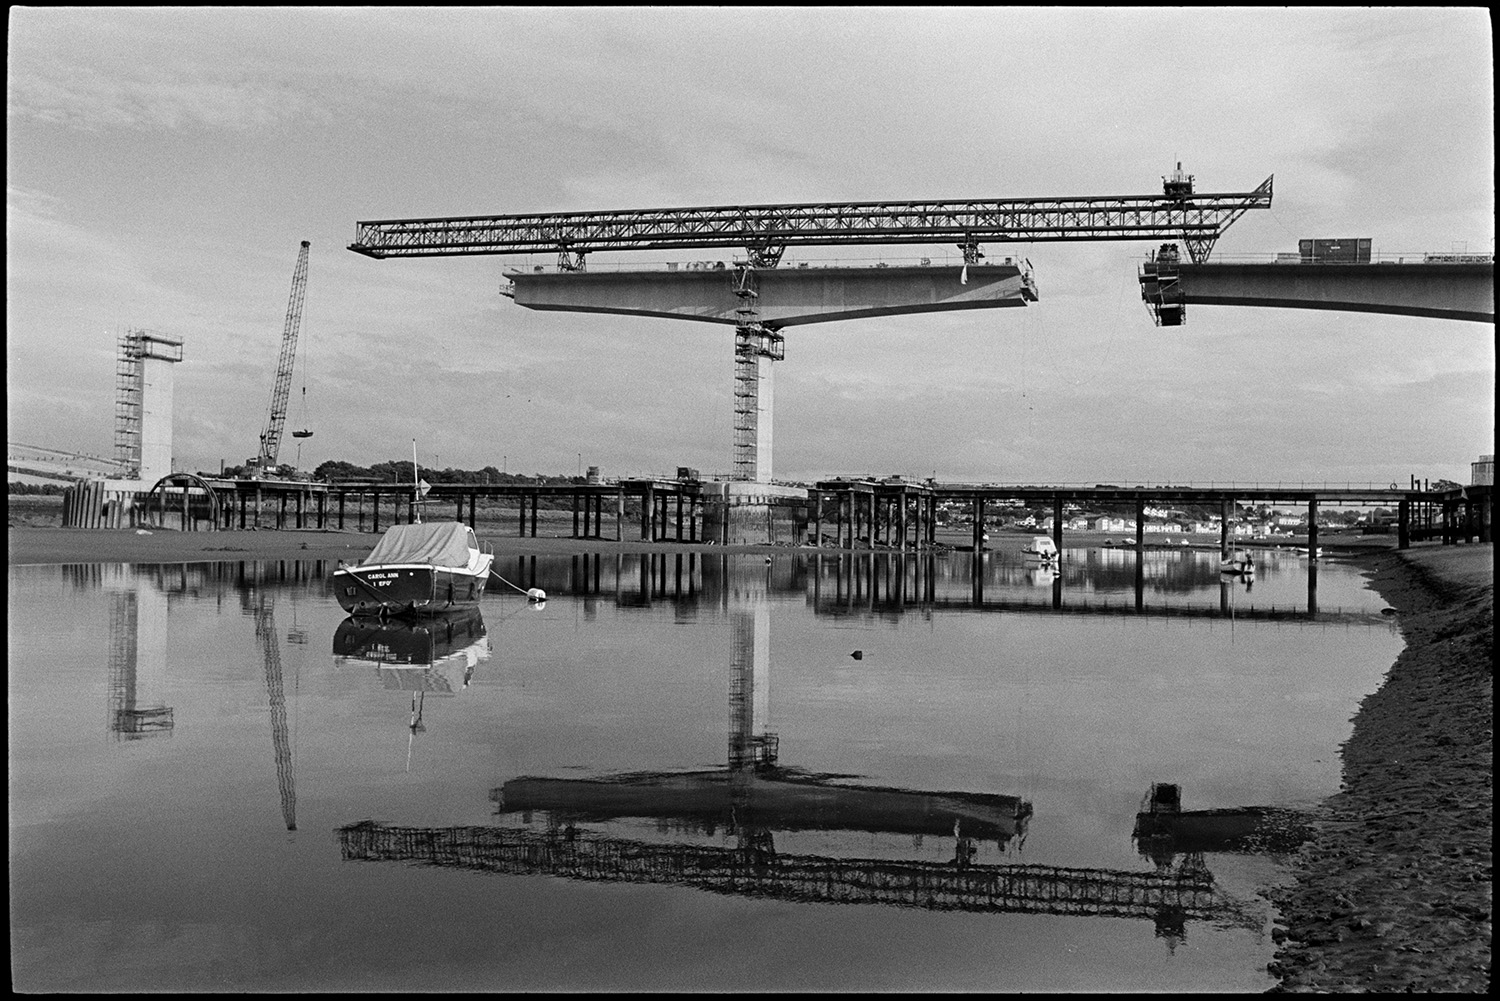 New bridge under construction over river, mudflats with small craft, boats. 
[Cranes constructing Bideford New Bridge across the River Torridge. Small boats can be seen moored on the river in the foreground and reflections of the cranes are visible in the river.]